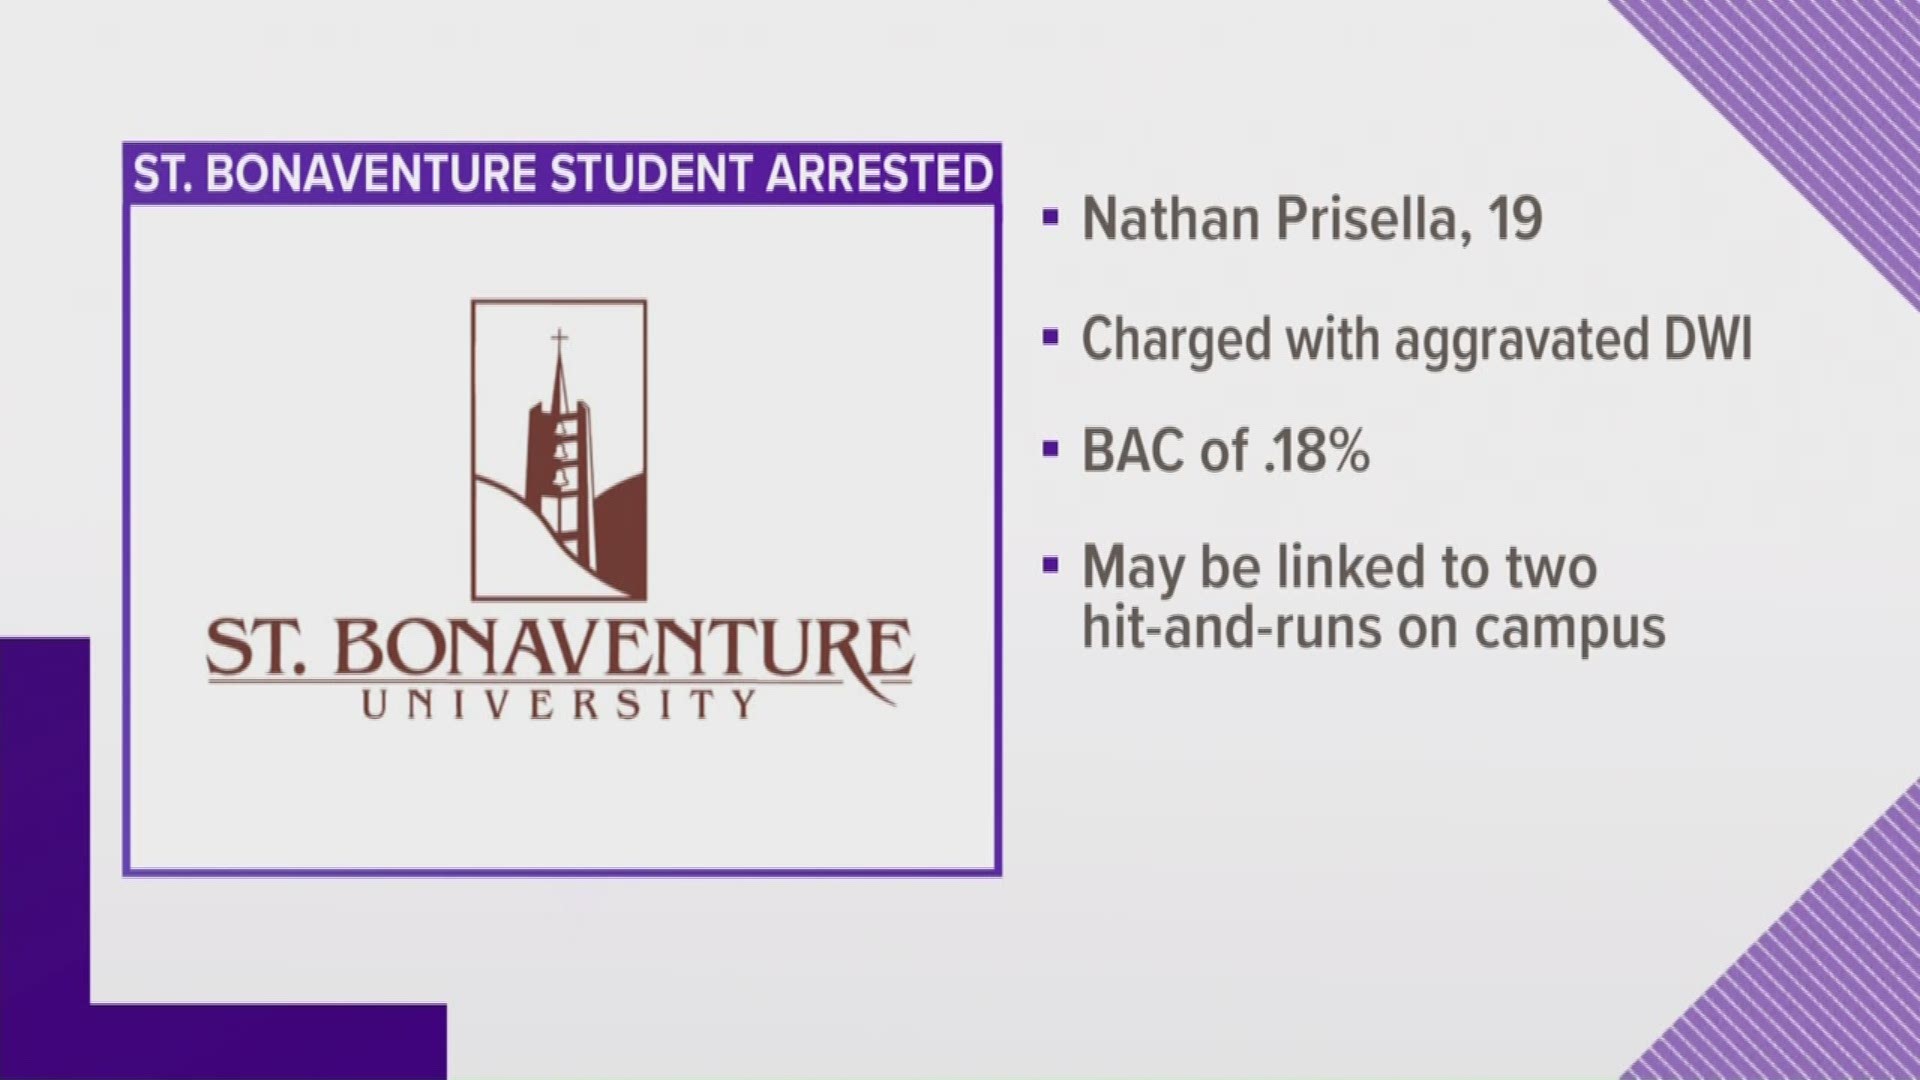 Nathan Prisella  charged with aggravated DWI